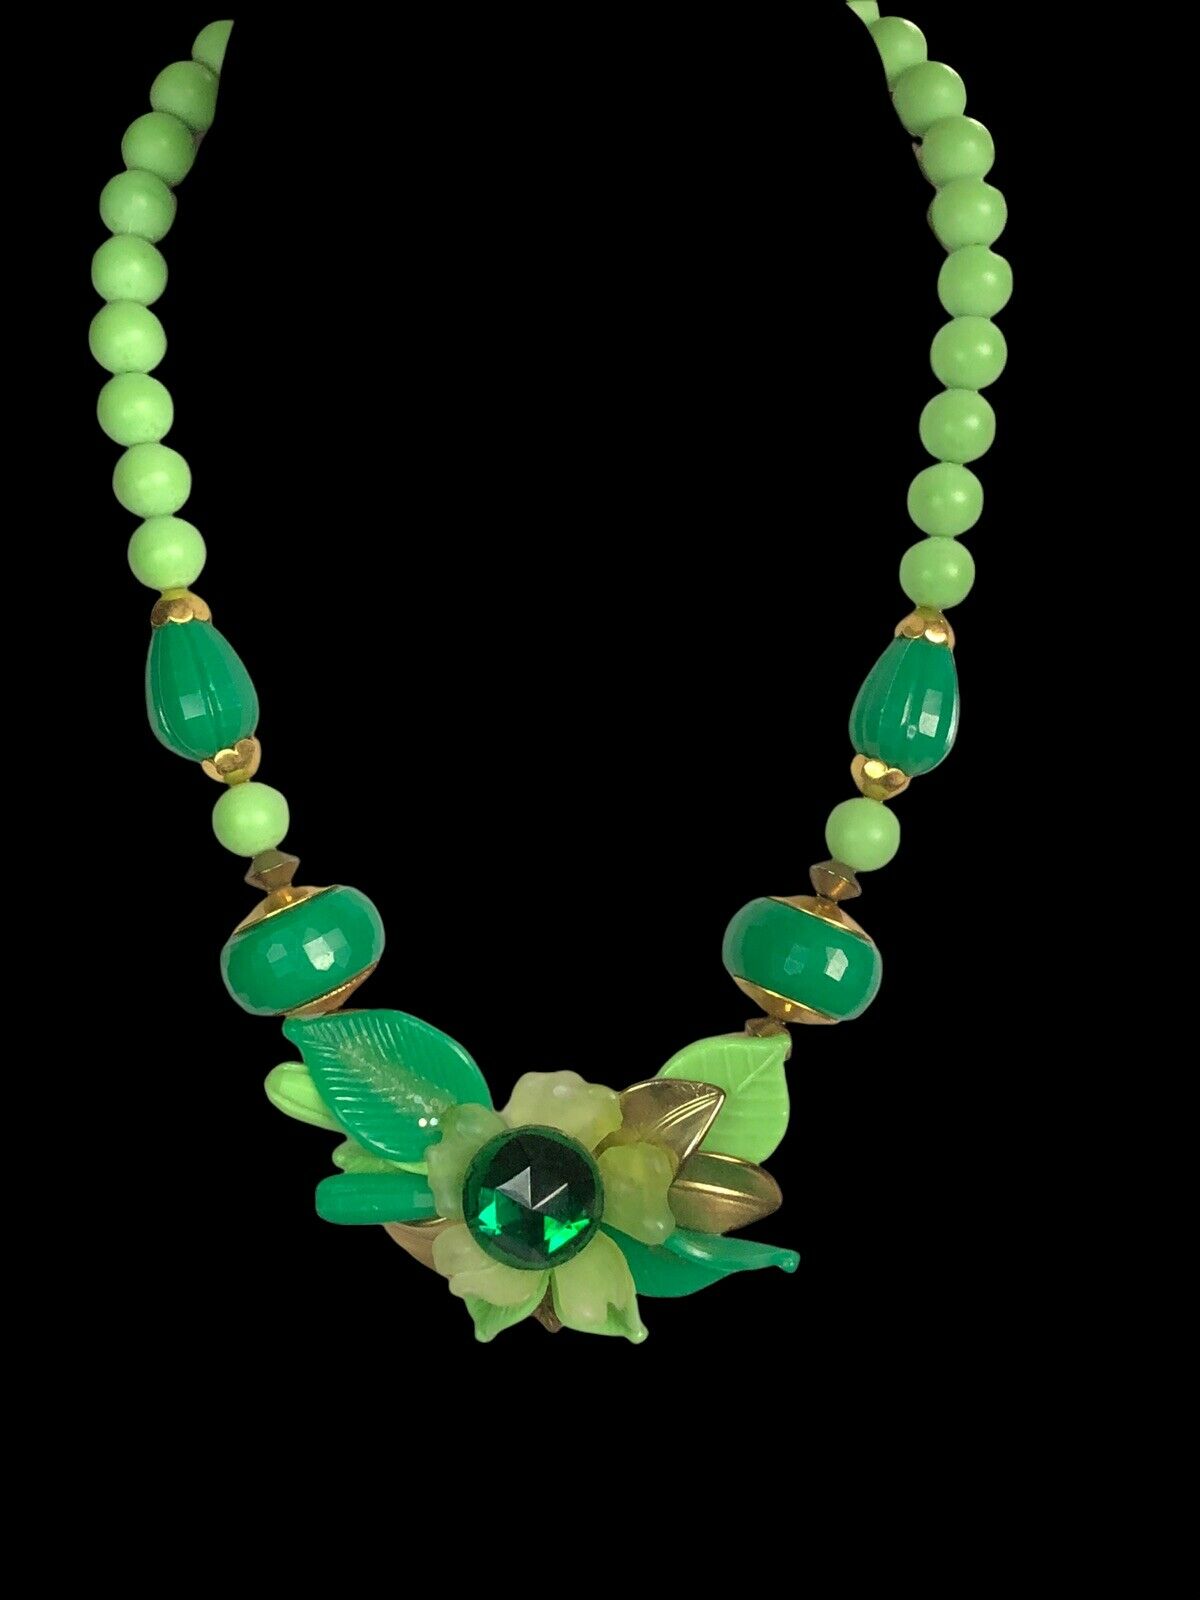 Vintage Signed Pierre Cardin Rare Runway Green Beaded Necklace